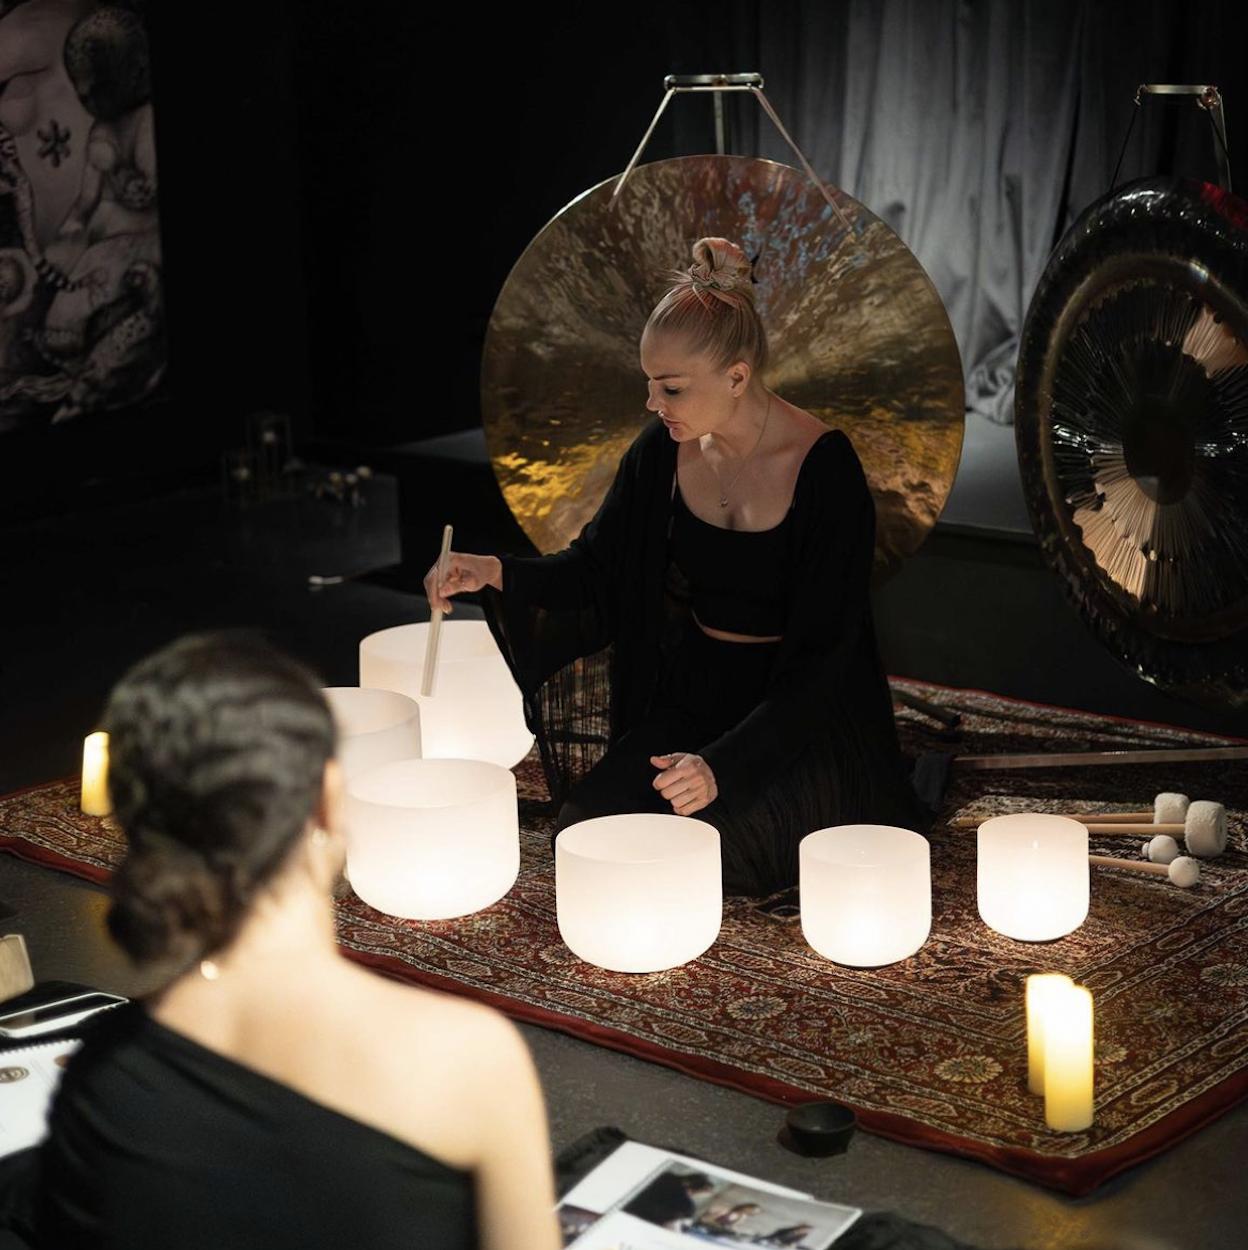 We Road-Tested Maria Lodetoft’s Sound Healing Session At The Mandrake, Here’s What Happened…